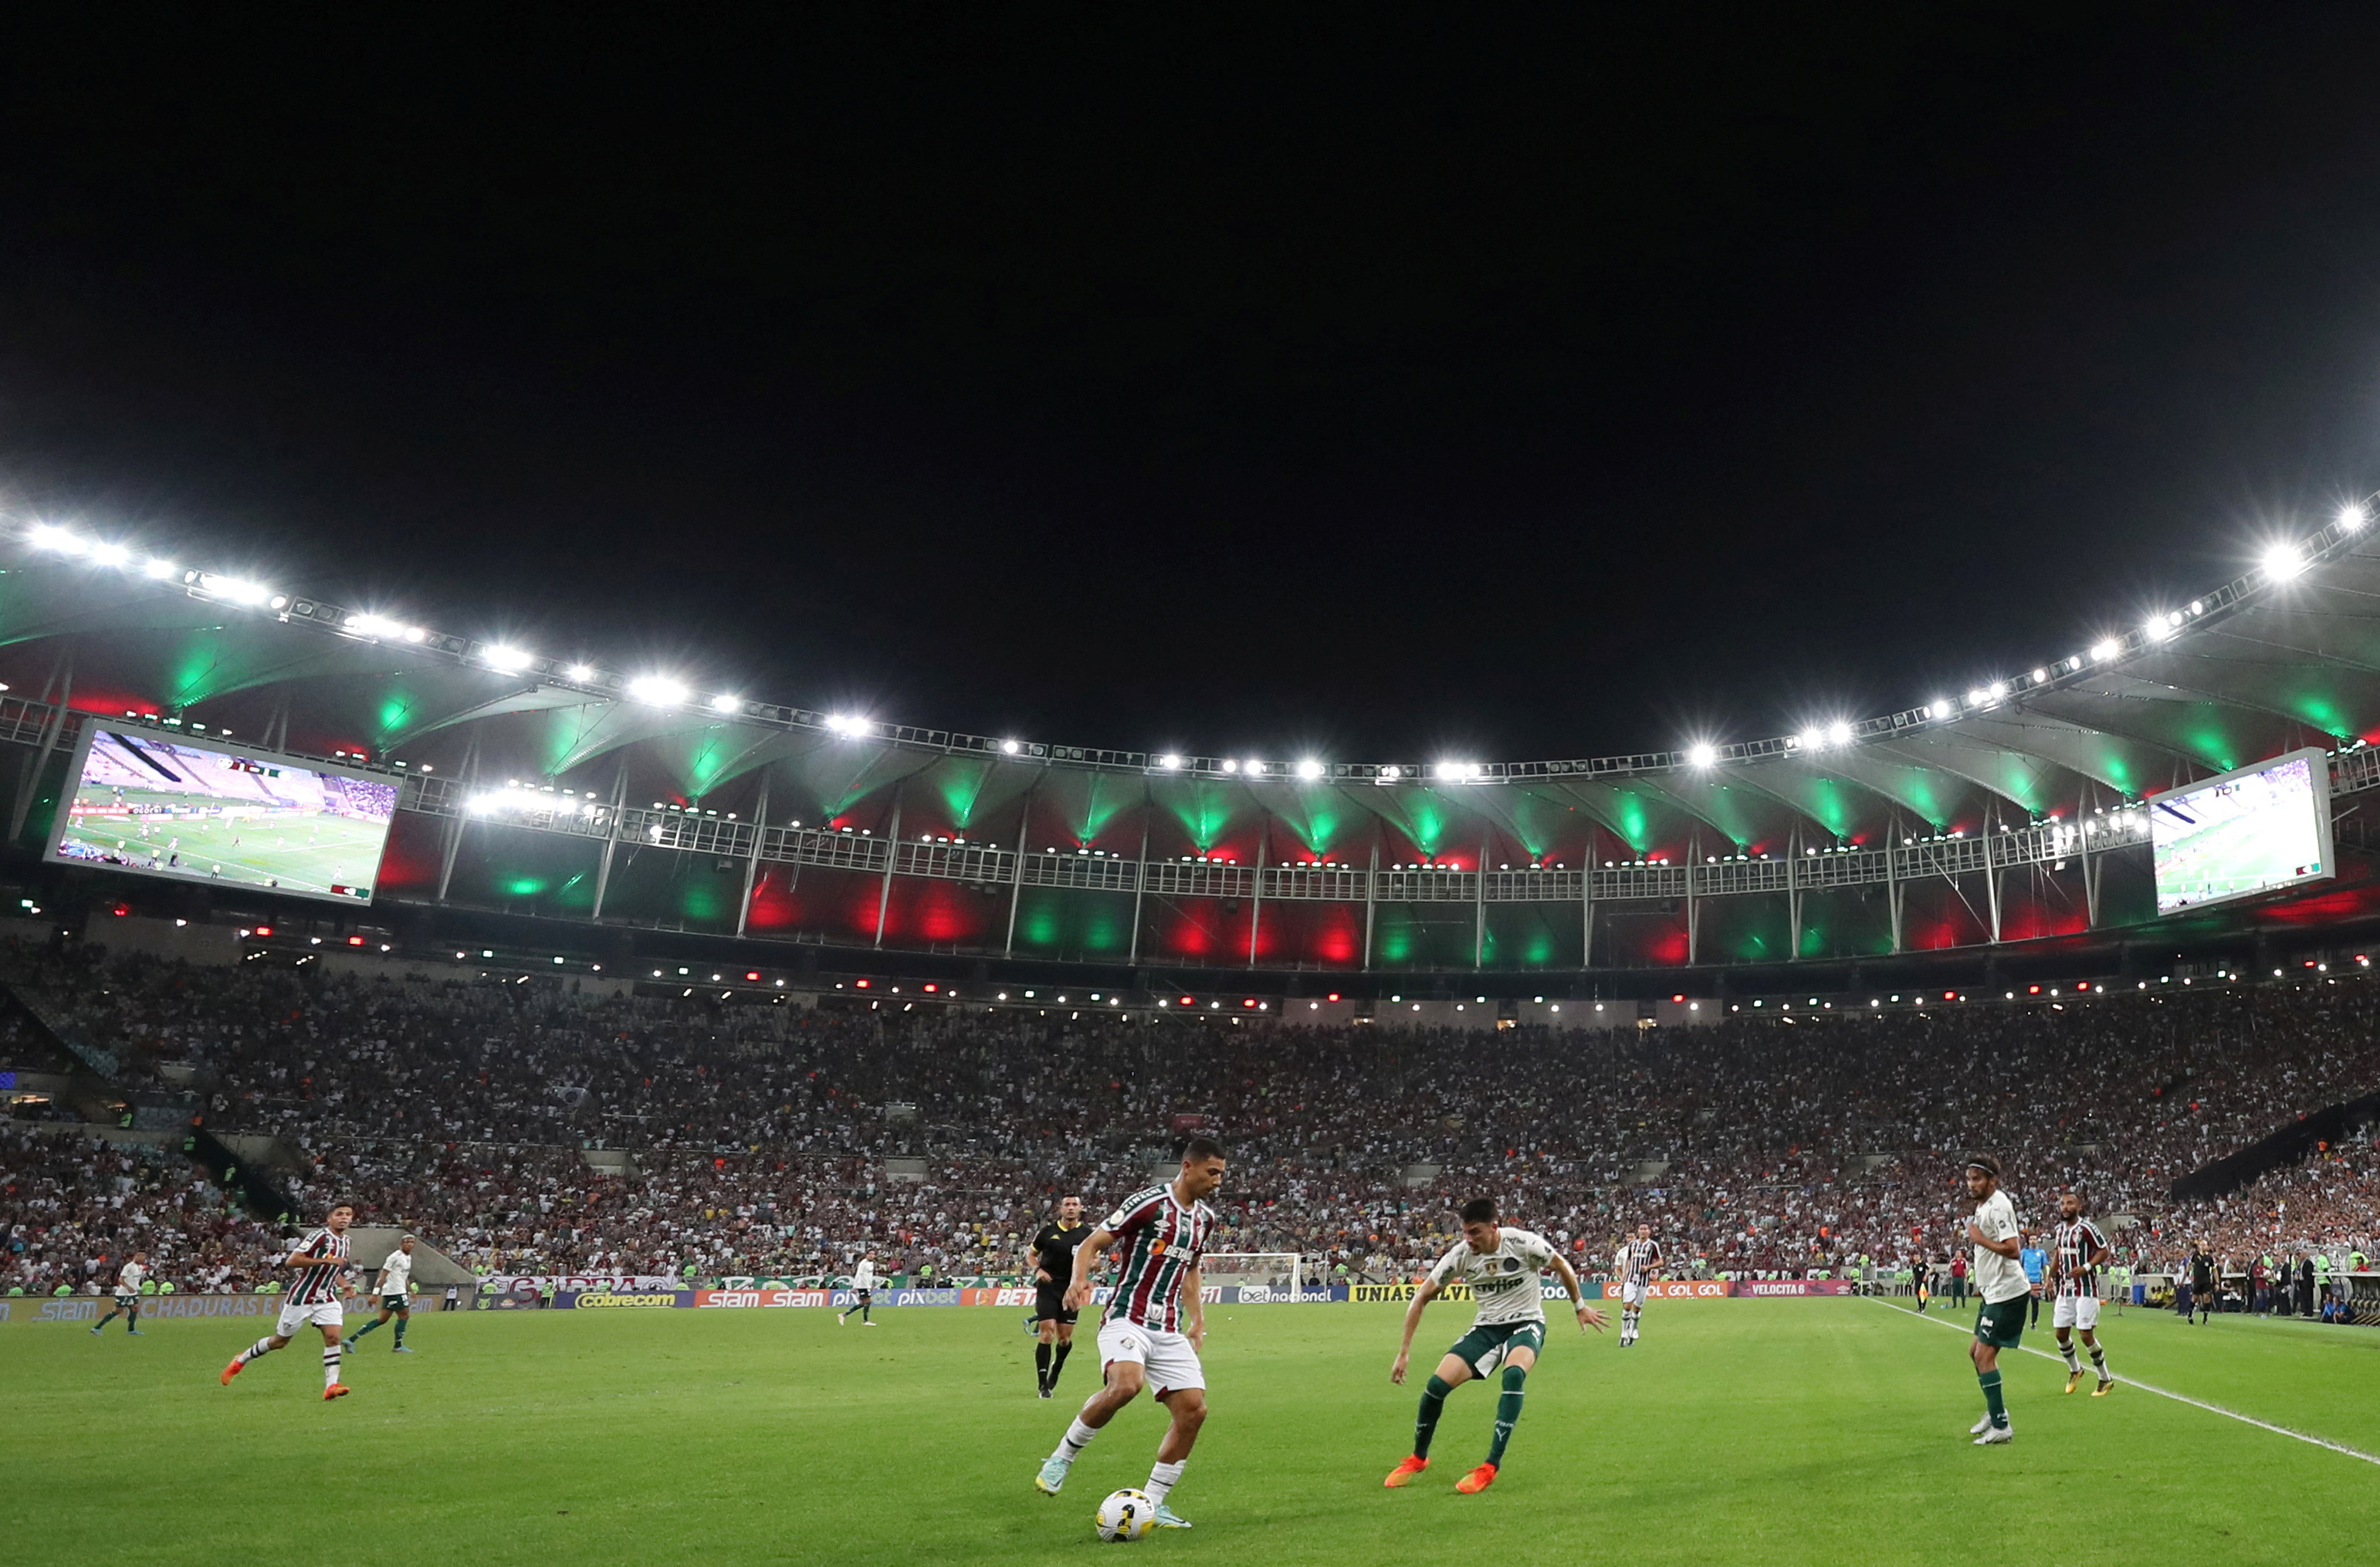 Brazil's Top Clubs Are Planning a Breakaway League - The New York